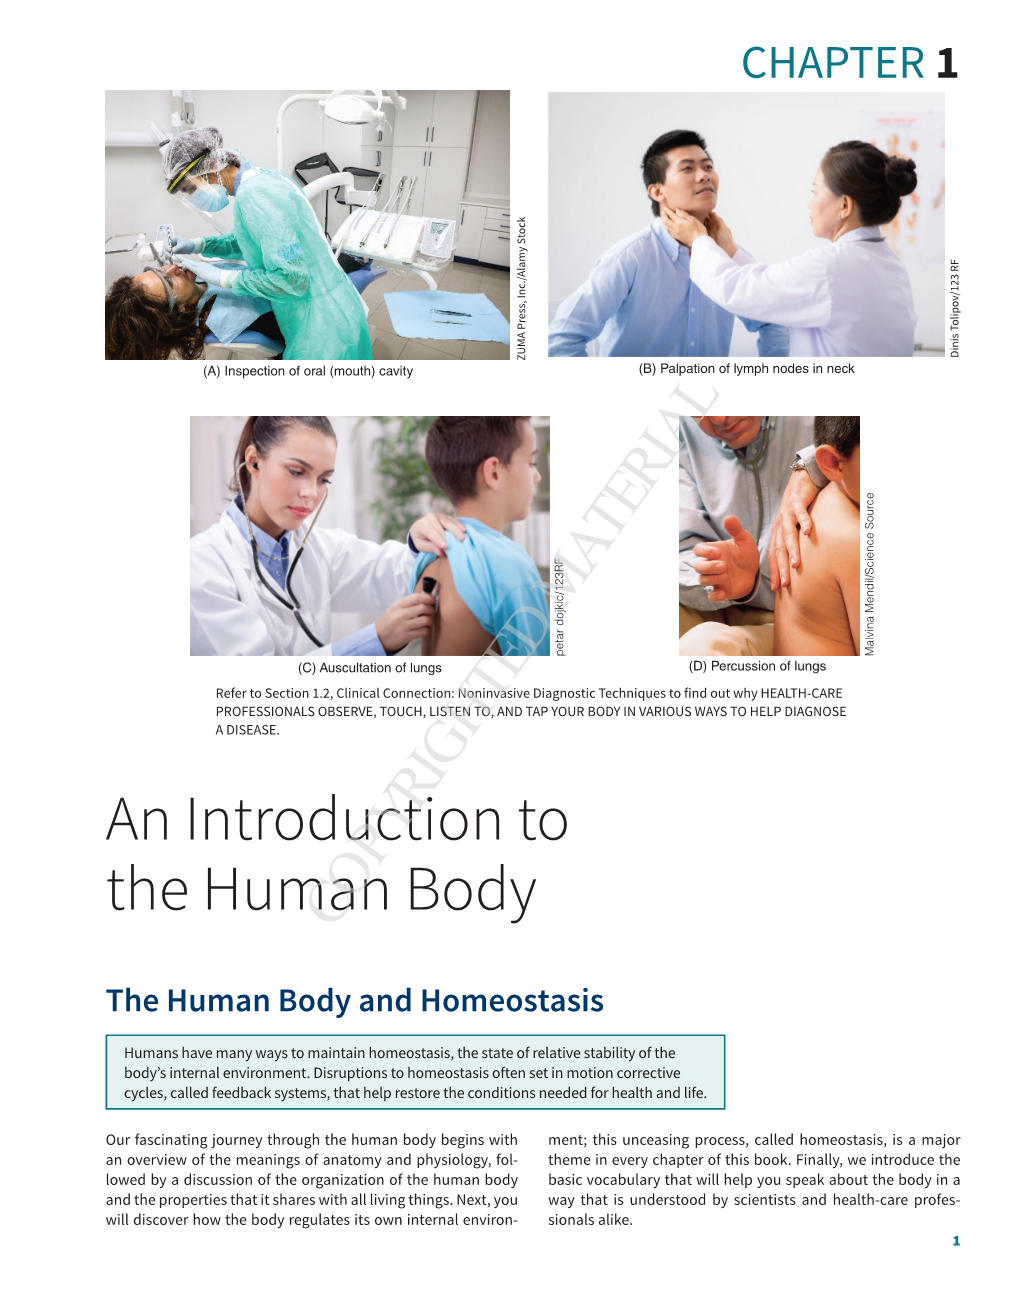 An Introduction to the Human Body